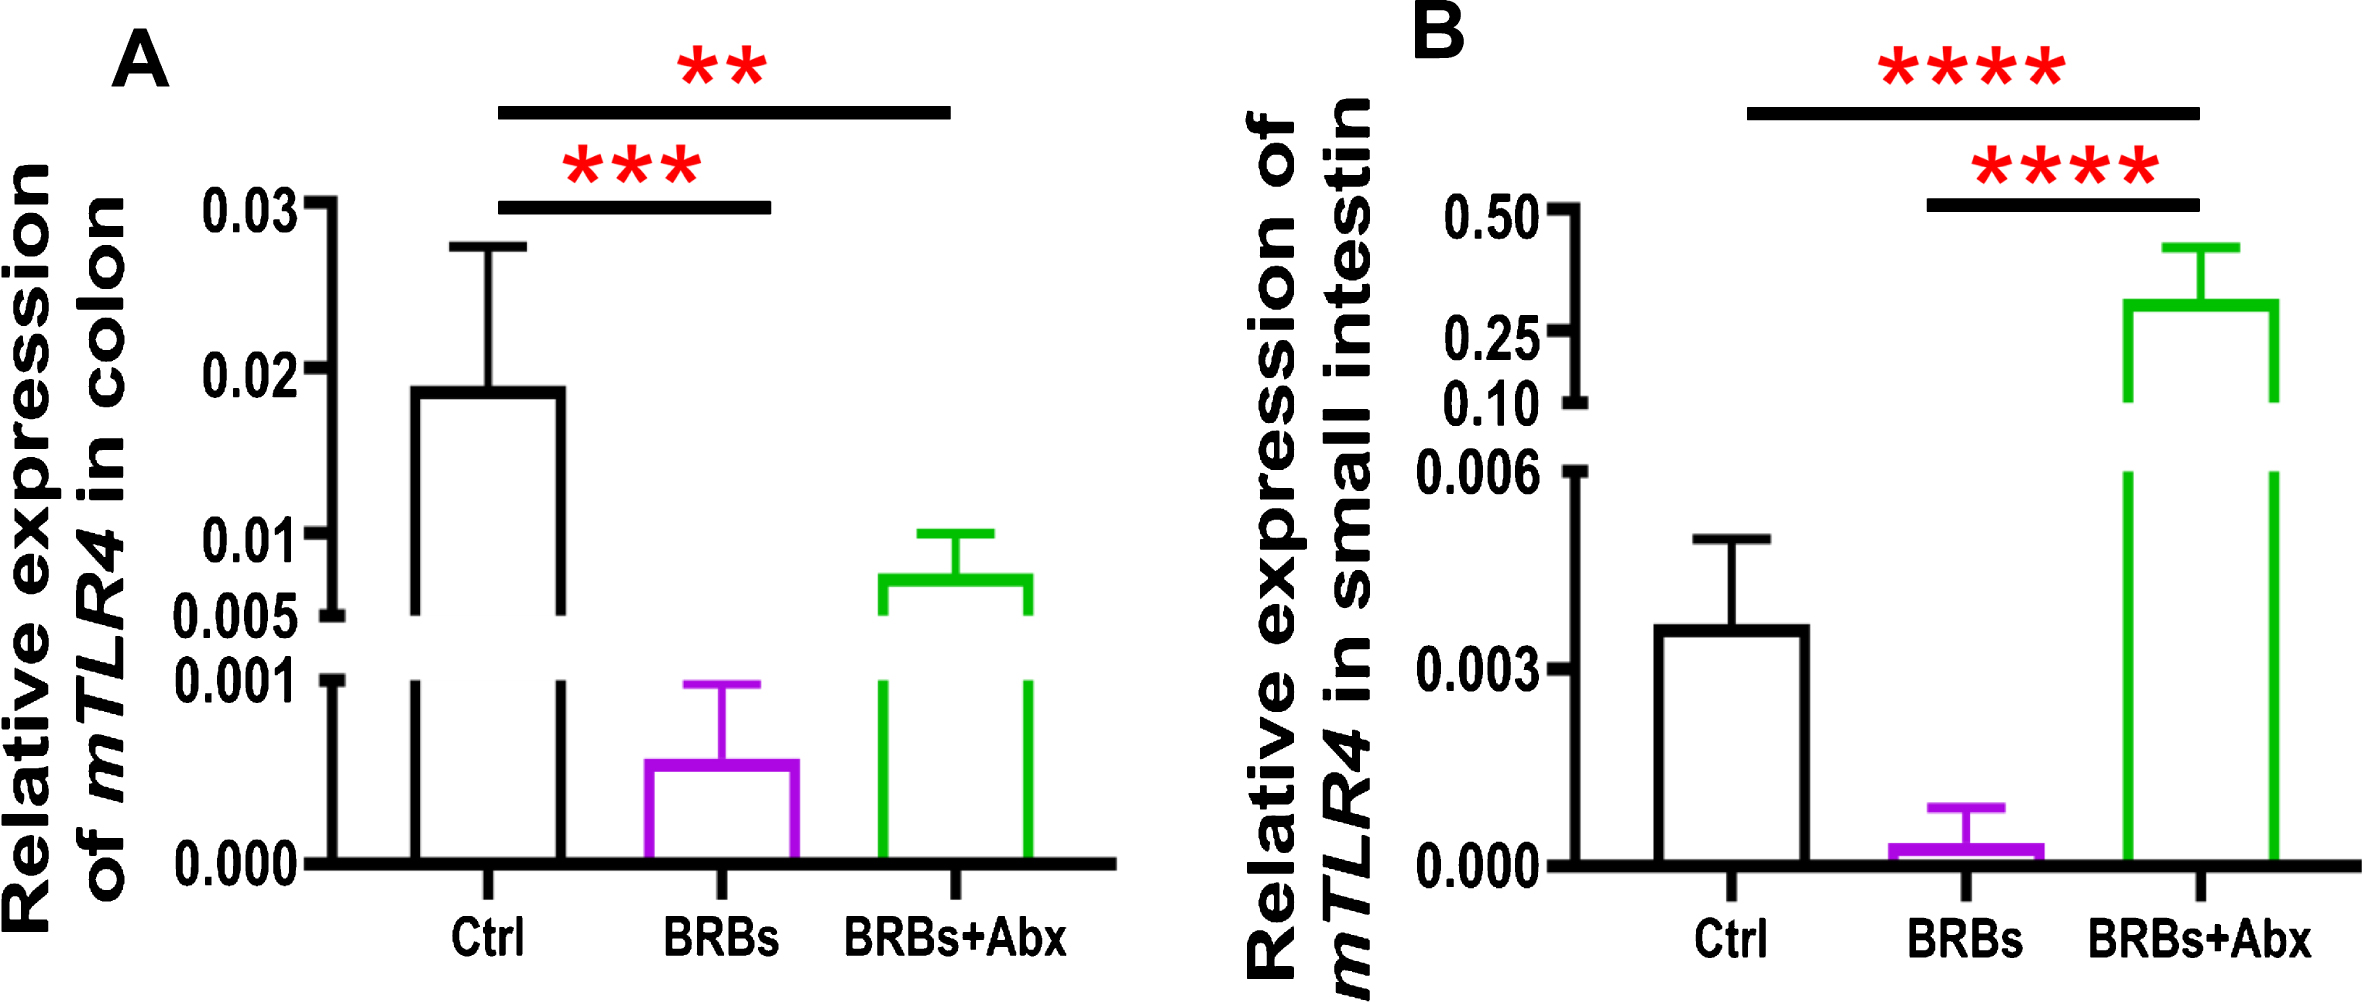 mRNA expression levels of TLR4 in colon (A) and small intestine (B) of ApcMin/+ mice. Ctrl: control diet; Abx: antibiotics. ** p < 0.01; *** p < 0.001; **** p < 0.0001.